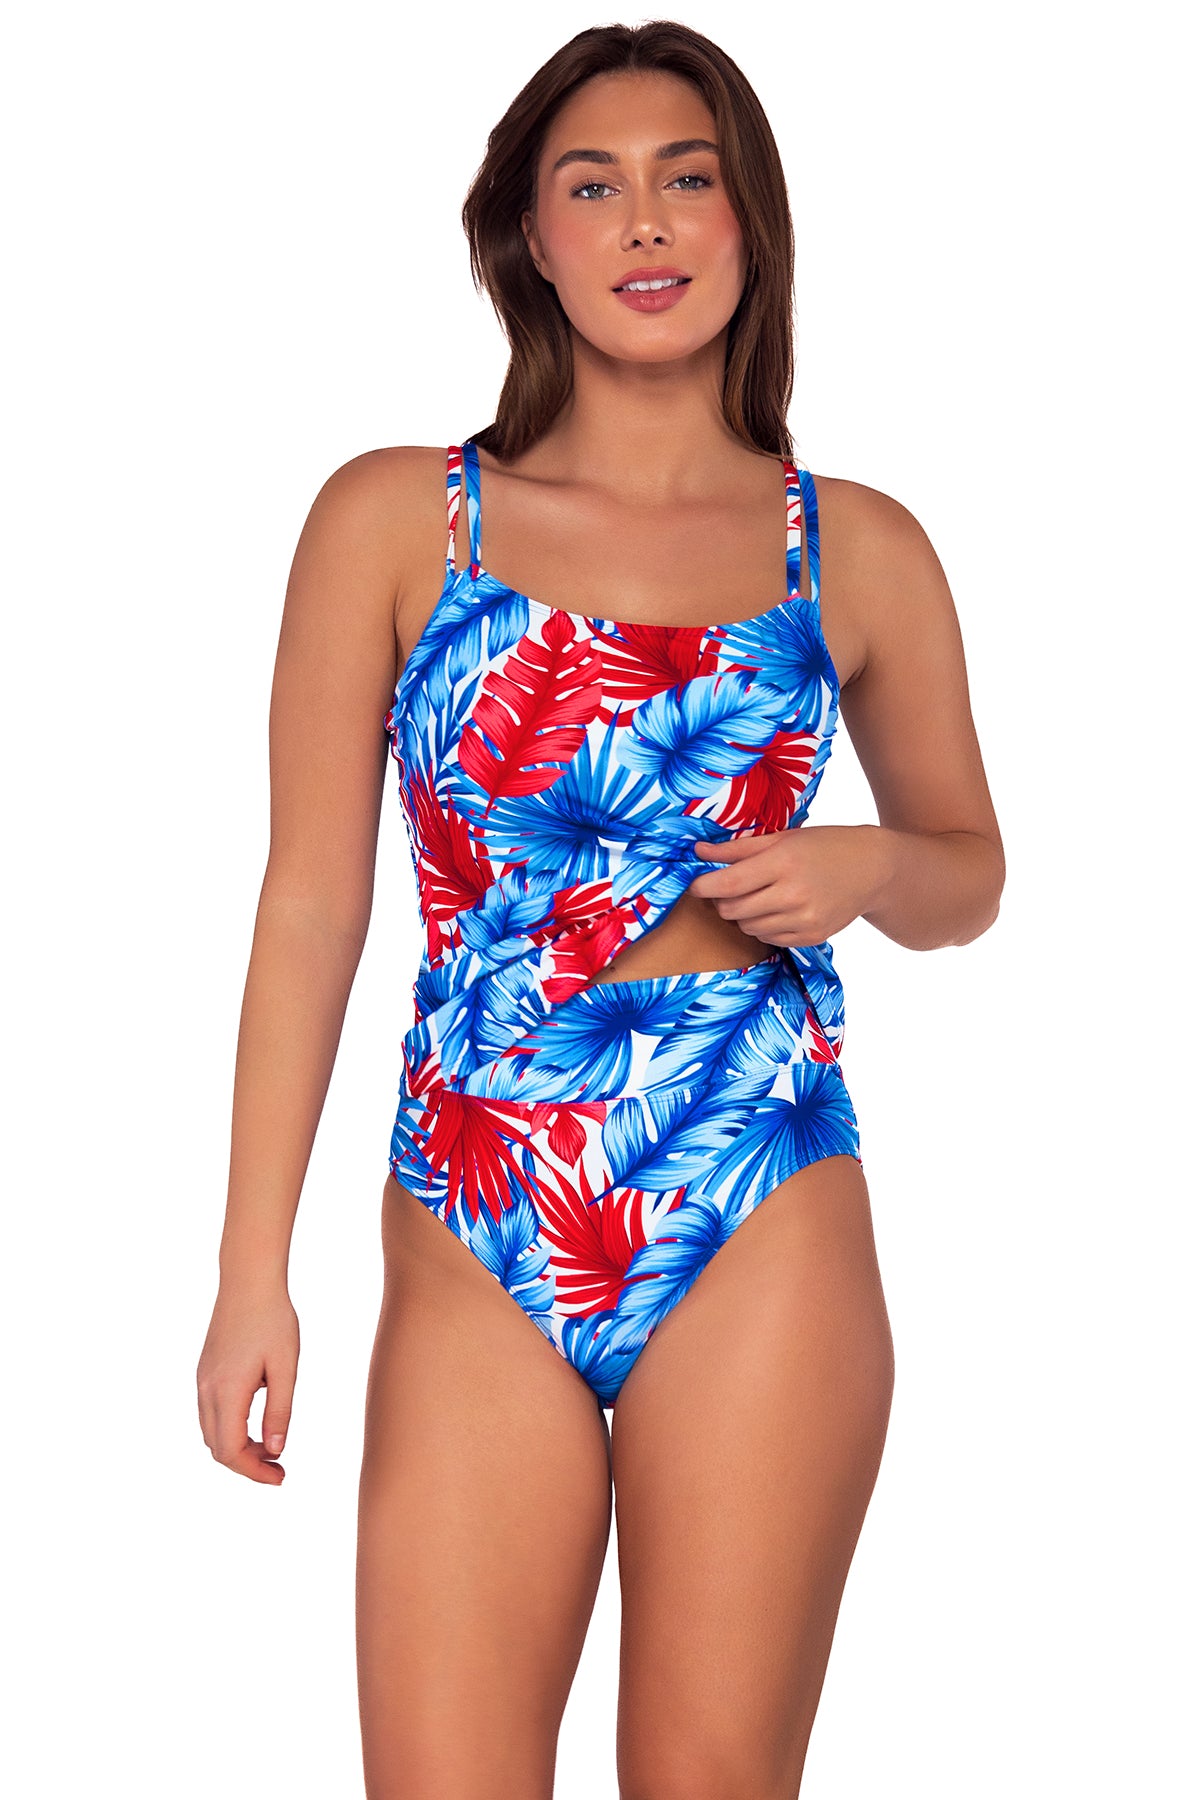 Front view of the Sunsets American Dream Taylor Tankini swim top lifted to show off the American Dream Hannah High Waist bikini bottom